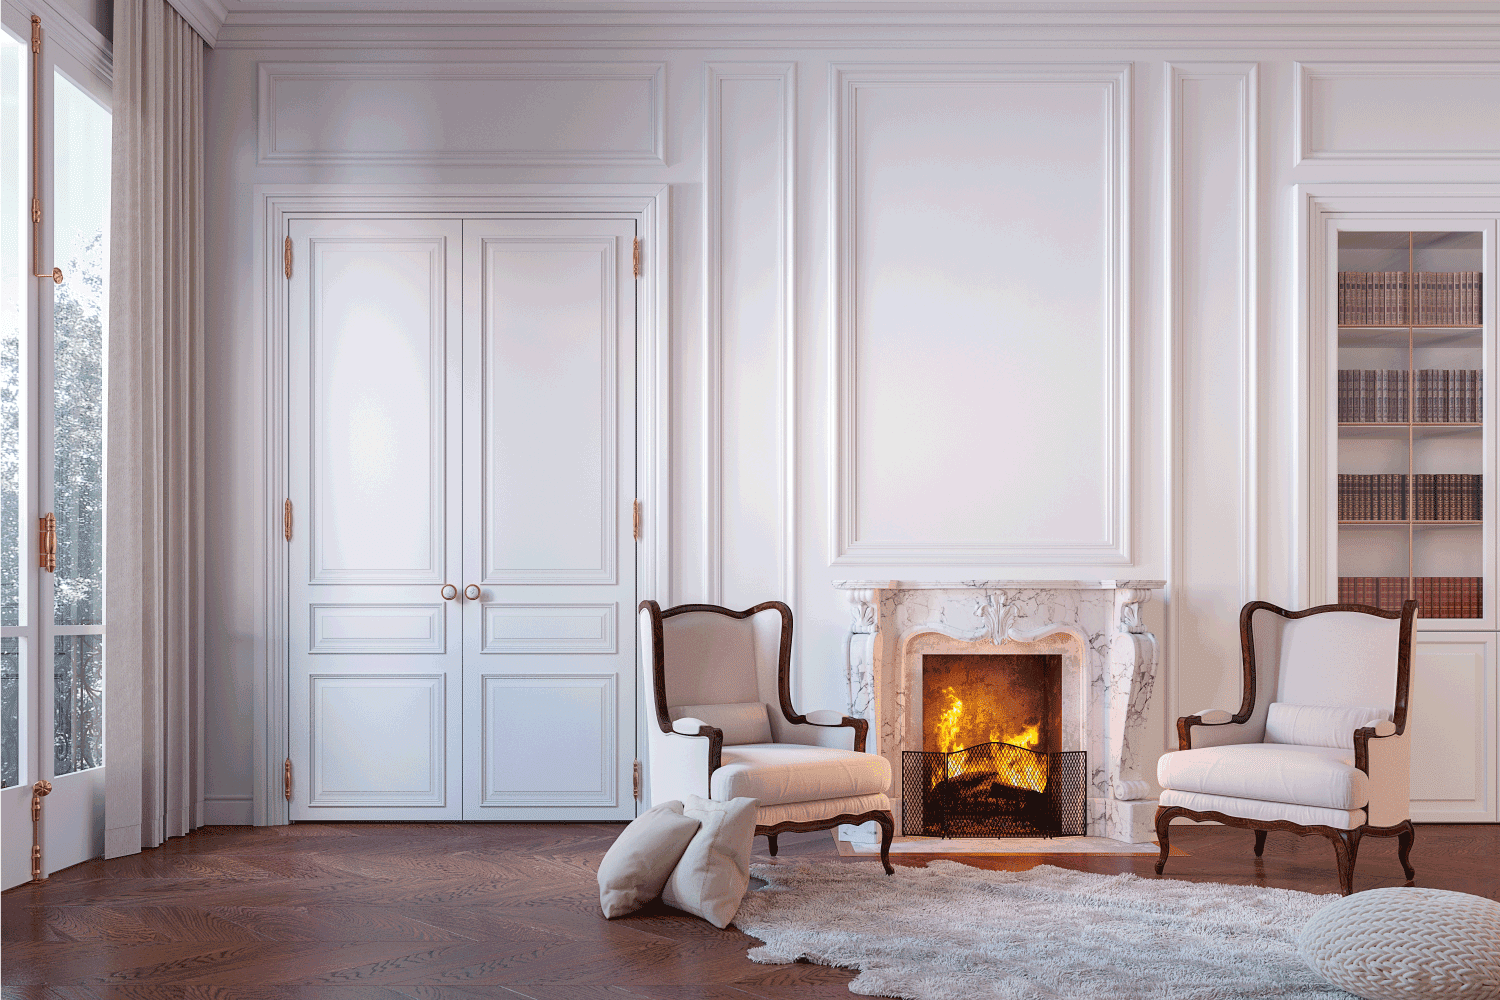 Classic white interior with fireplace, armchairs, carpet, moldings, wall panel